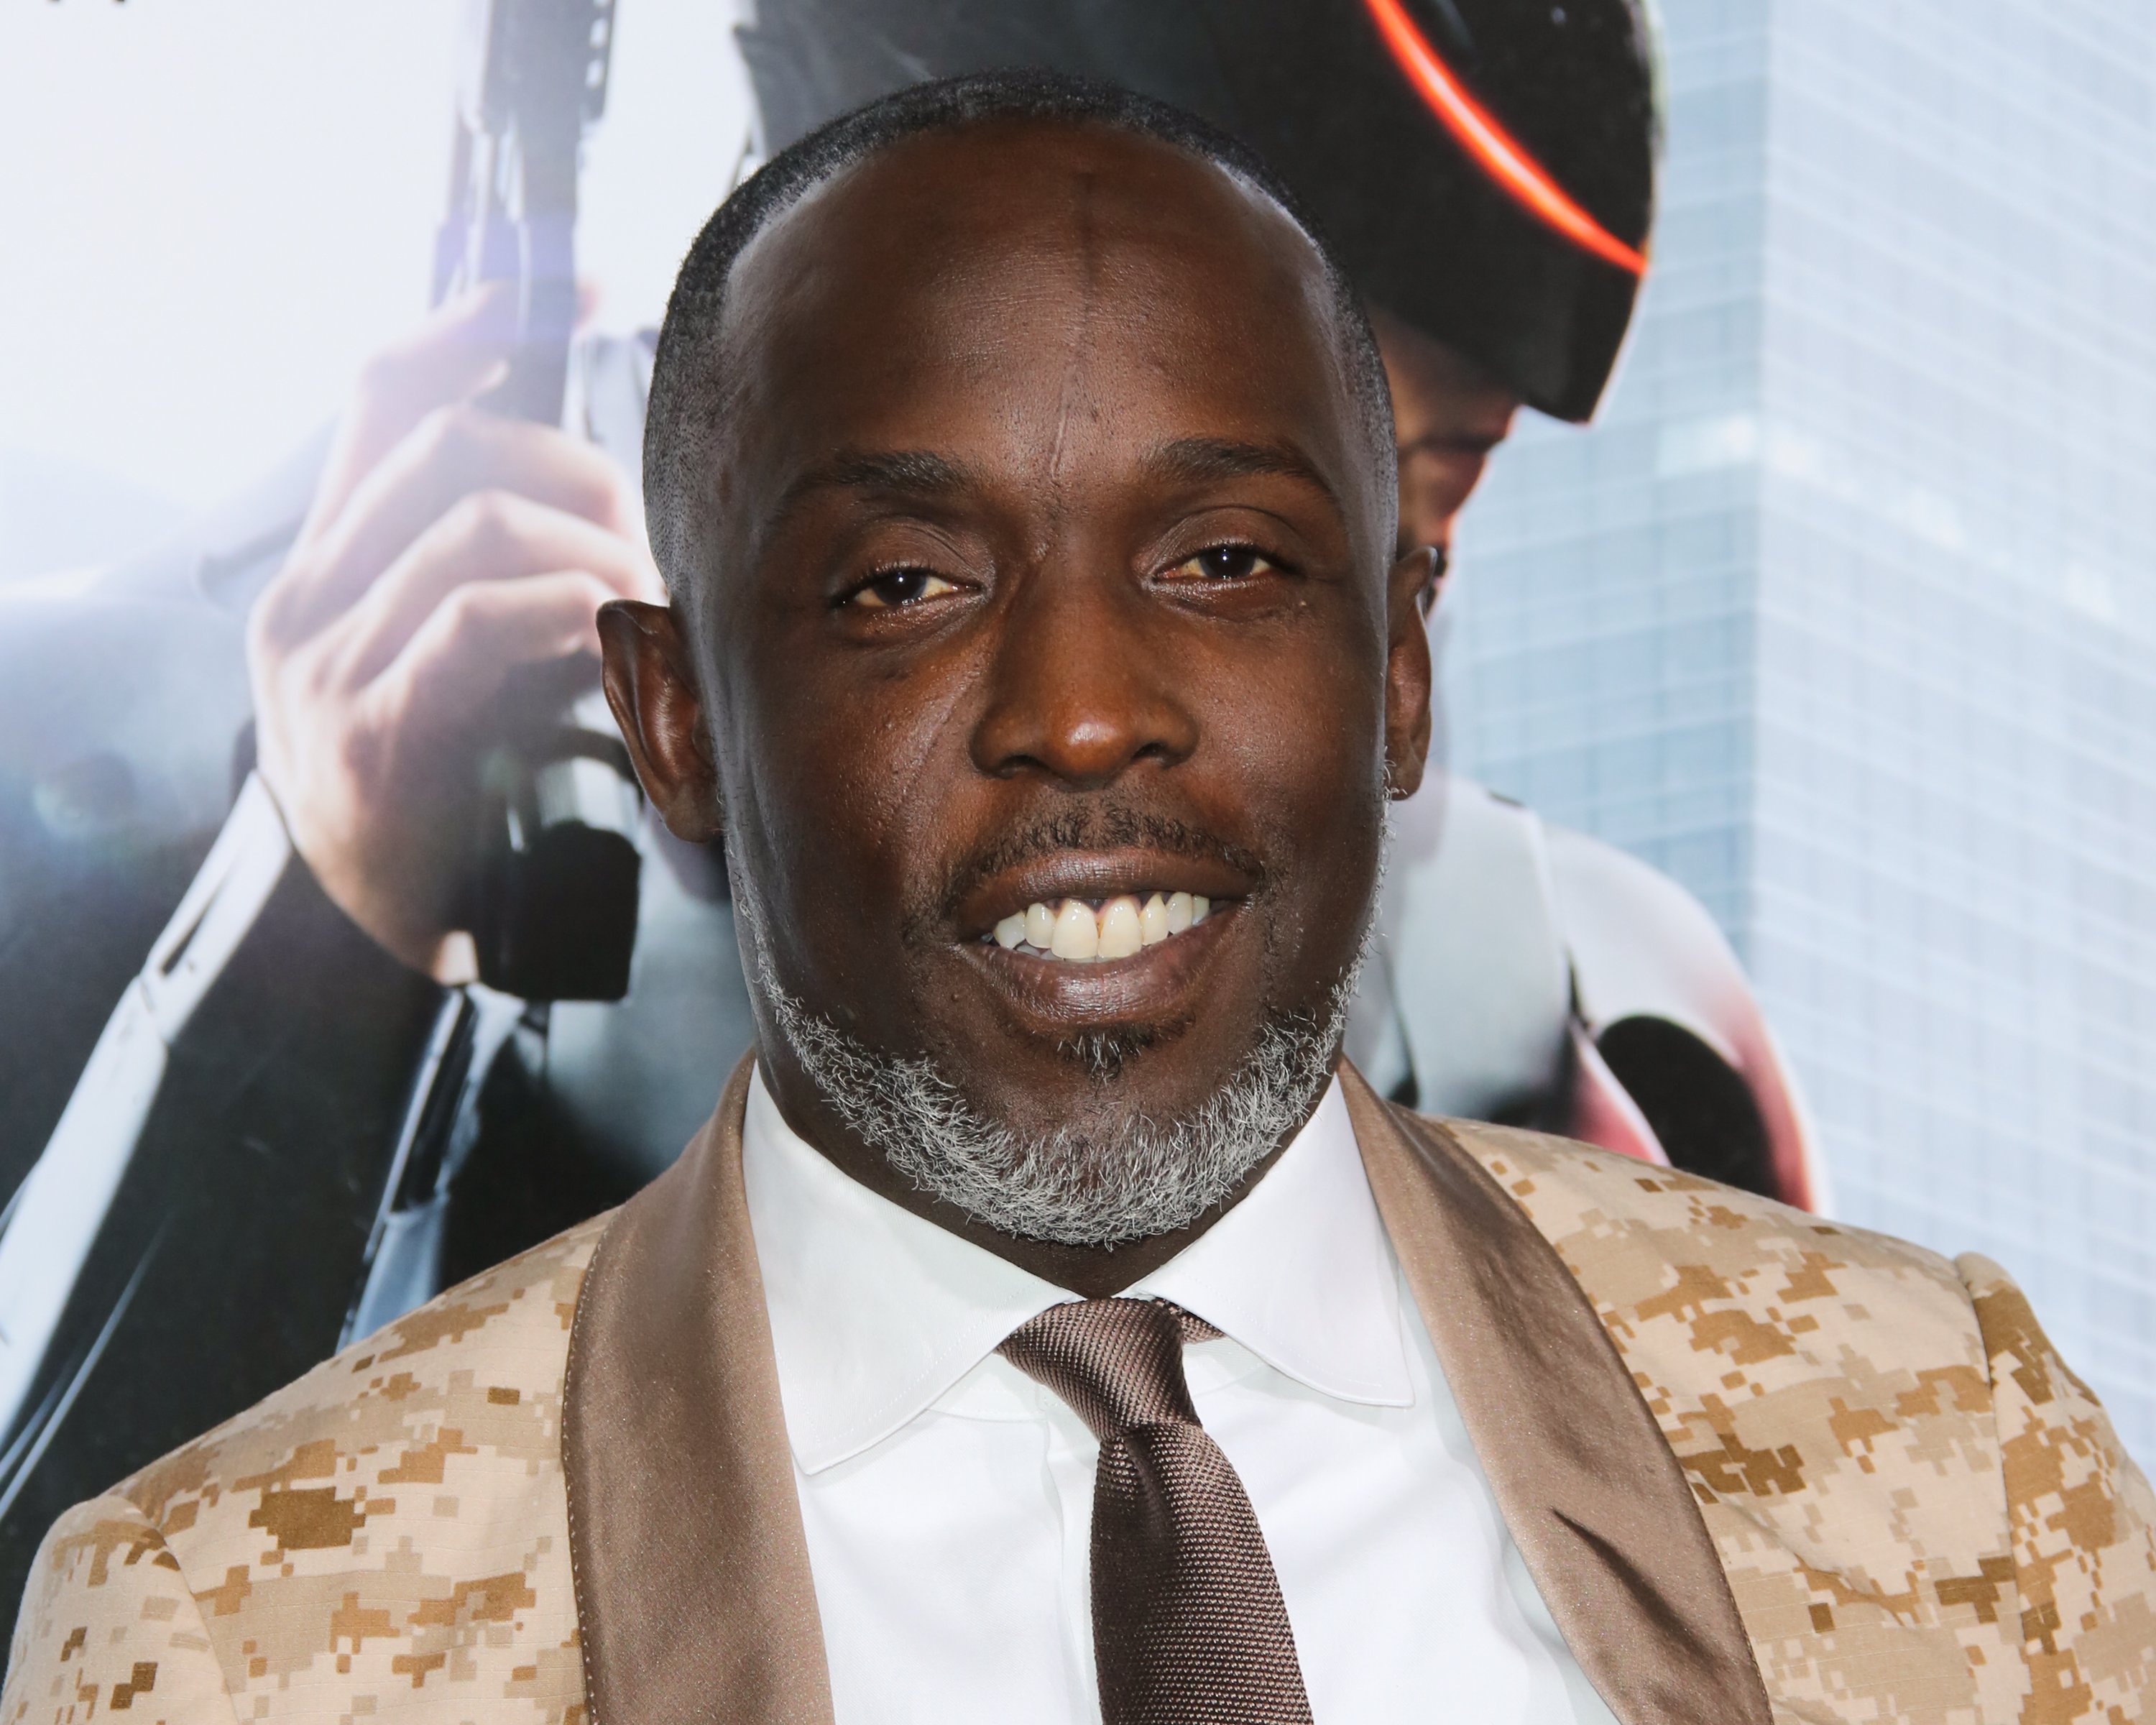 Michael K. Williams at the Los Angeles premiere of "Robocop" in Hollywood, California | Photo: Paul Archuleta/FilmMagic via Getty Images